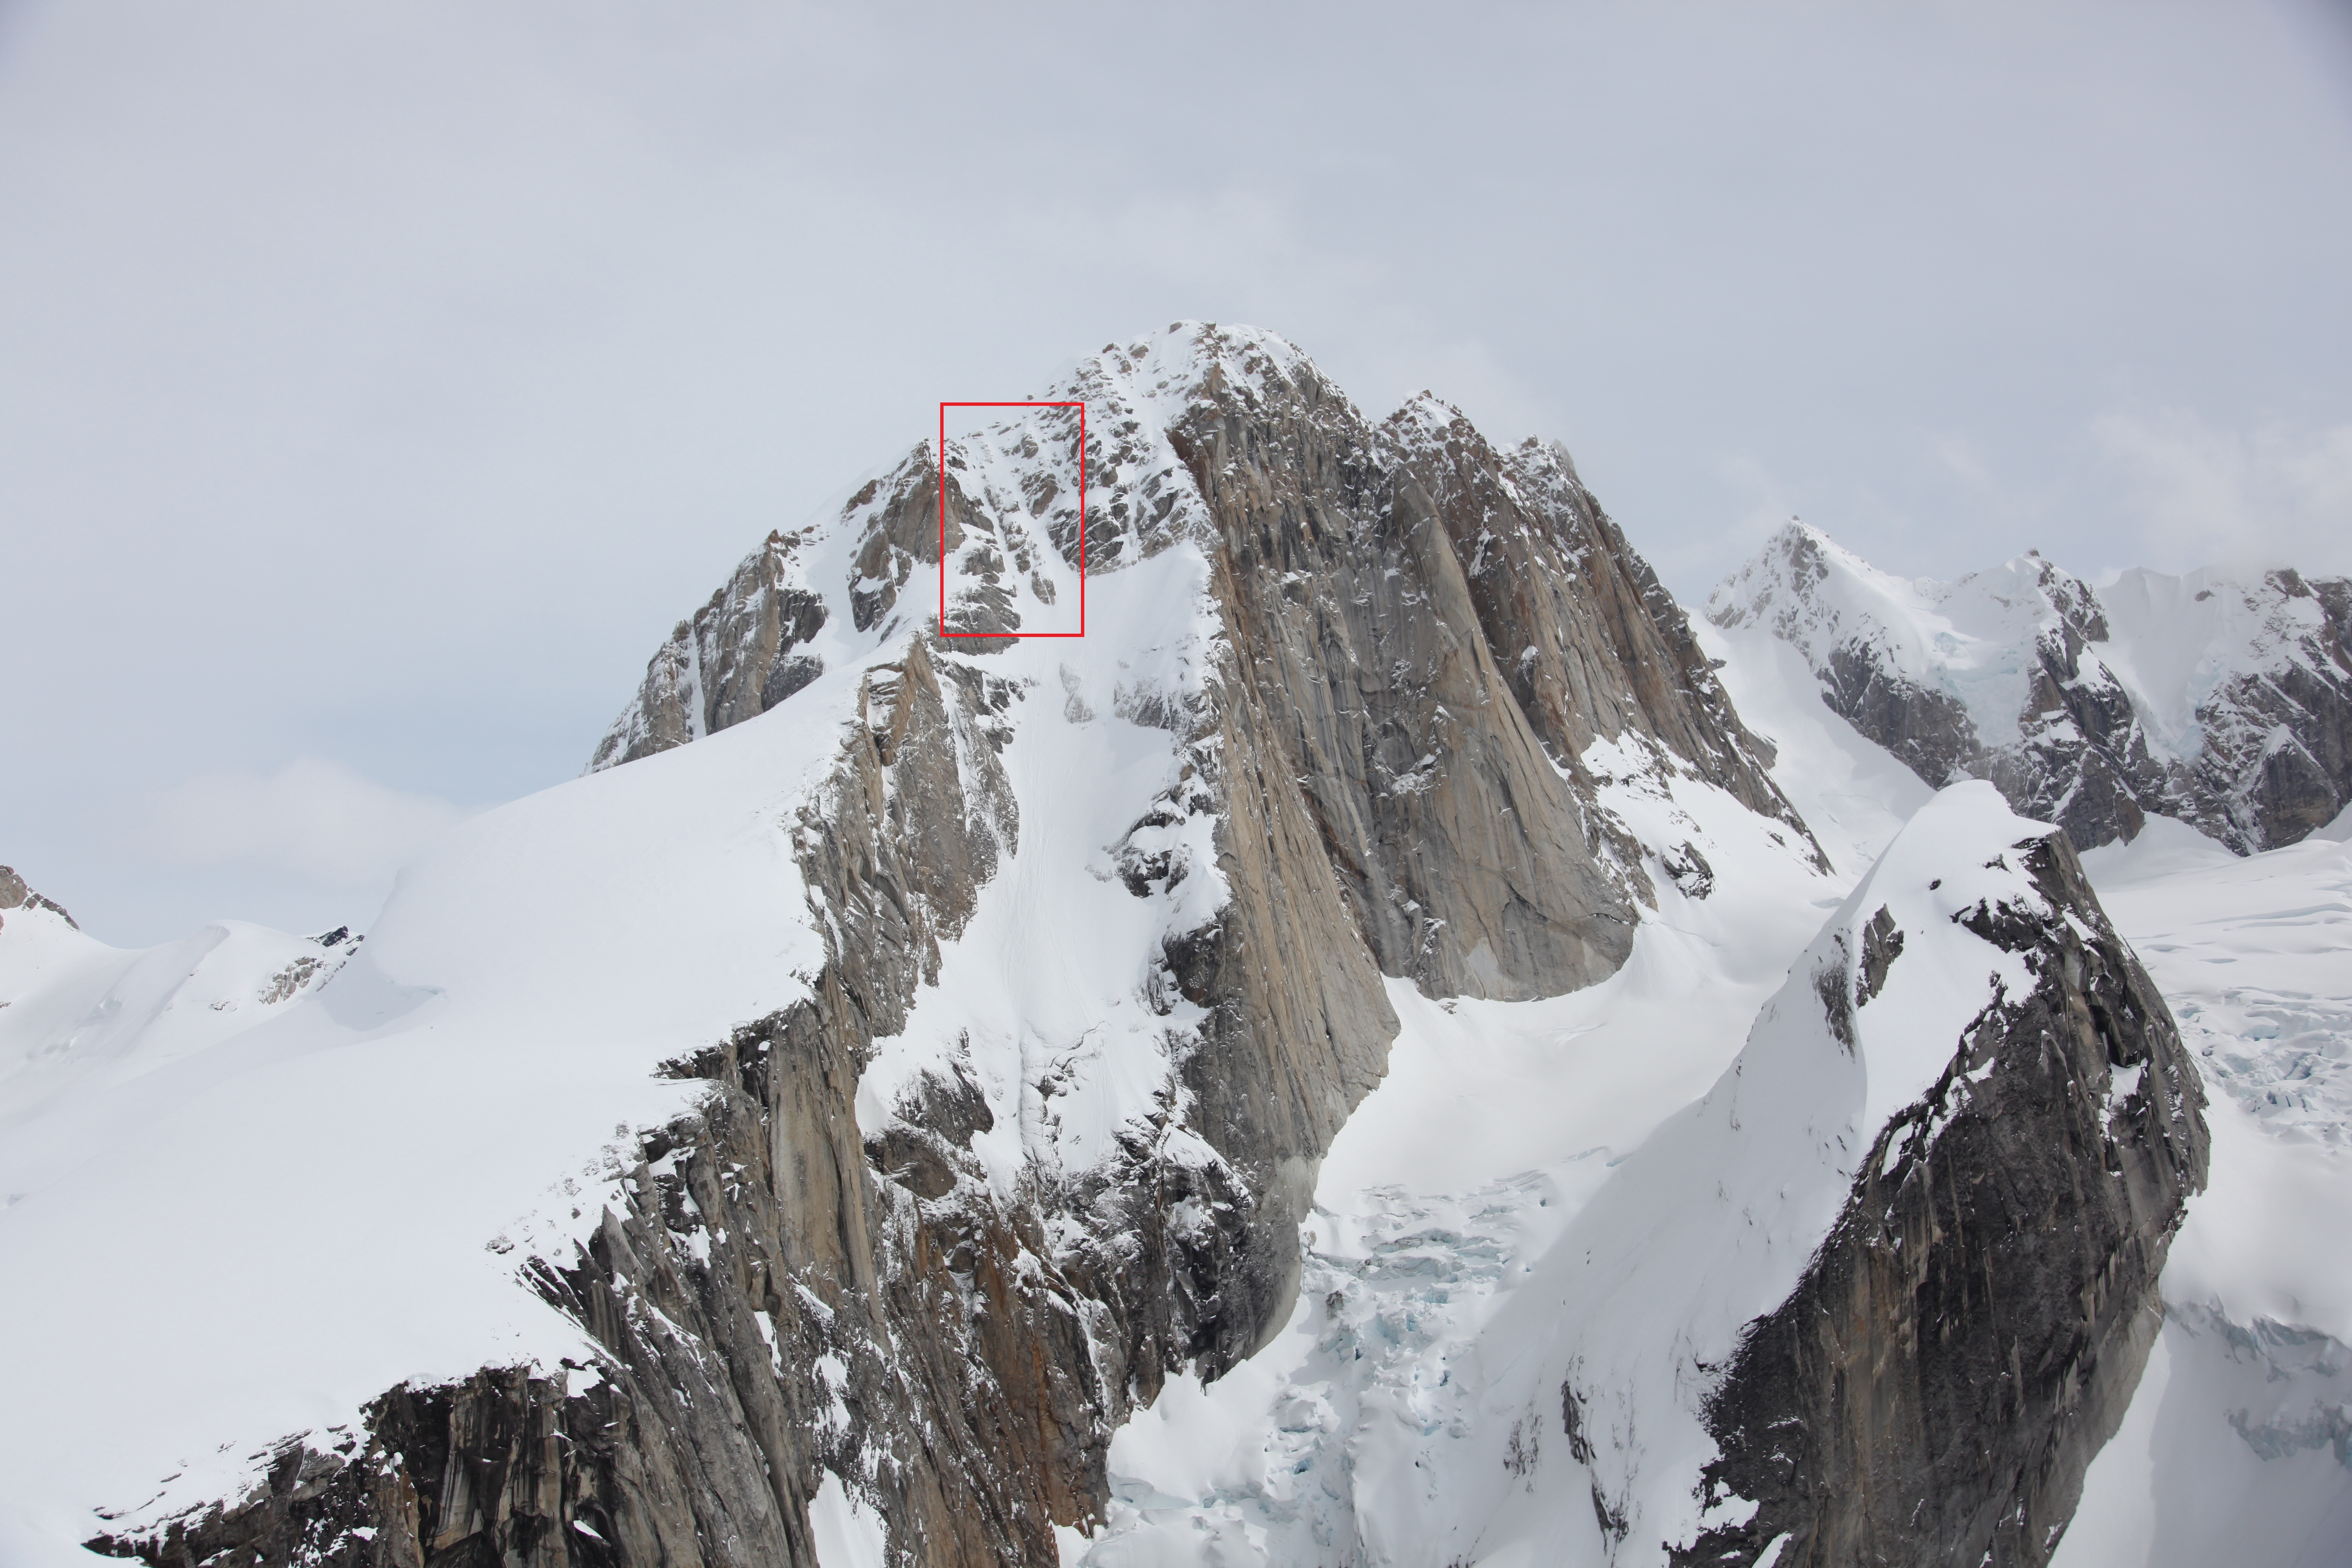 View of steep mountain ridge with an overlayed red box near the summit